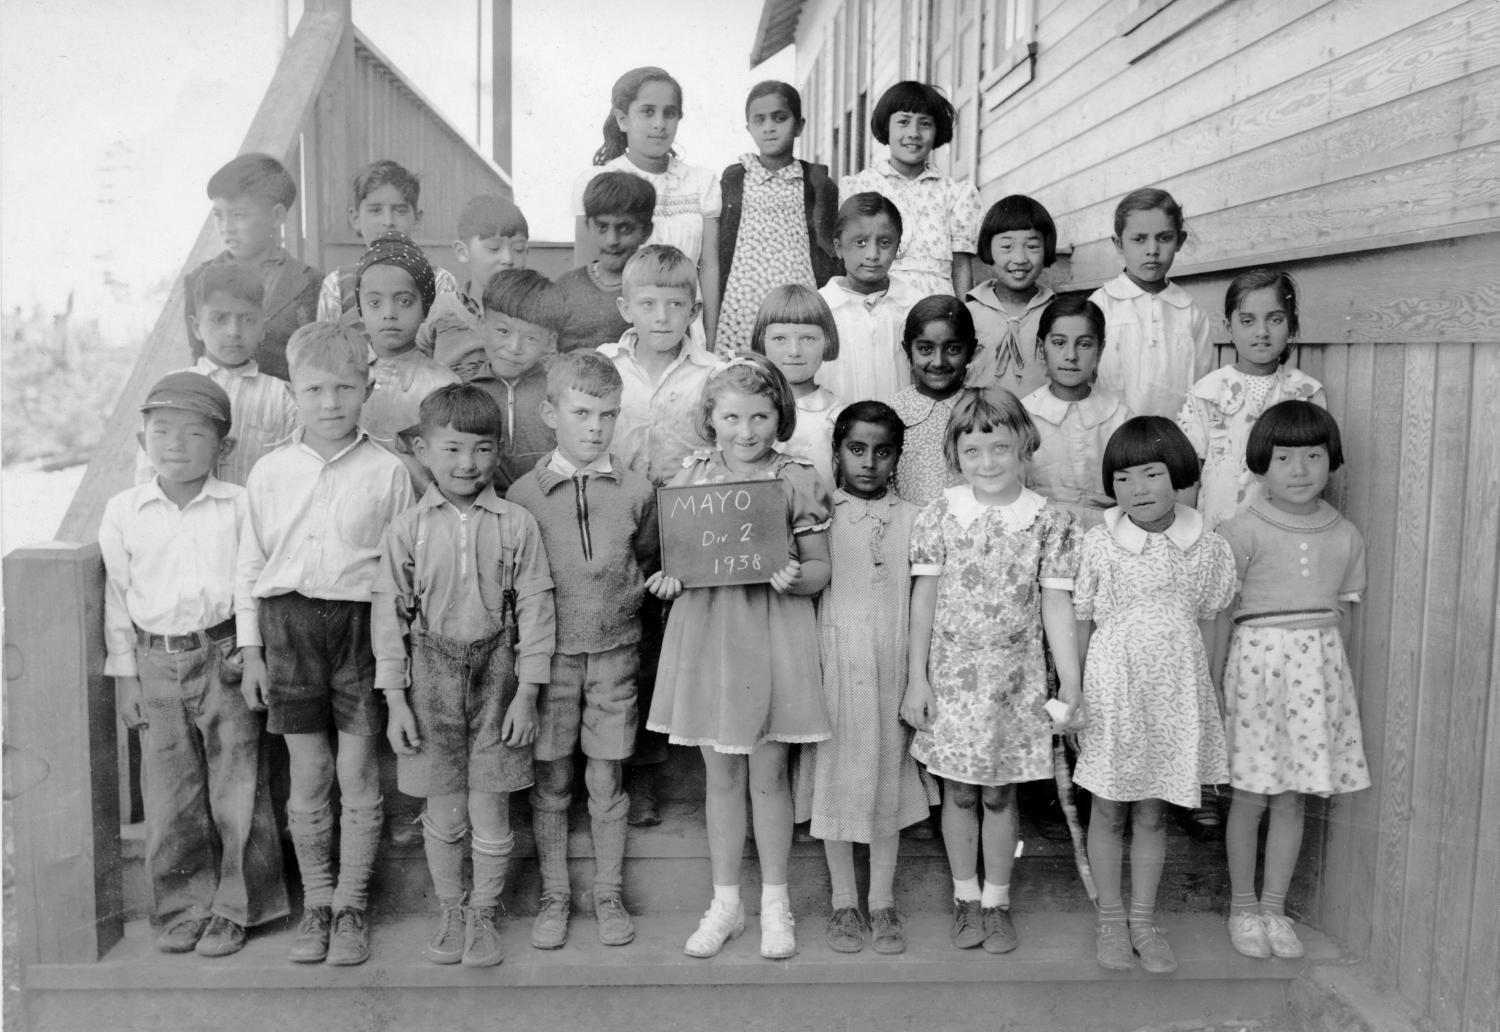 A school photo in Paldi from 1938 shows a mixed class of Japanese, Chinese, Indian and Caucasian children.